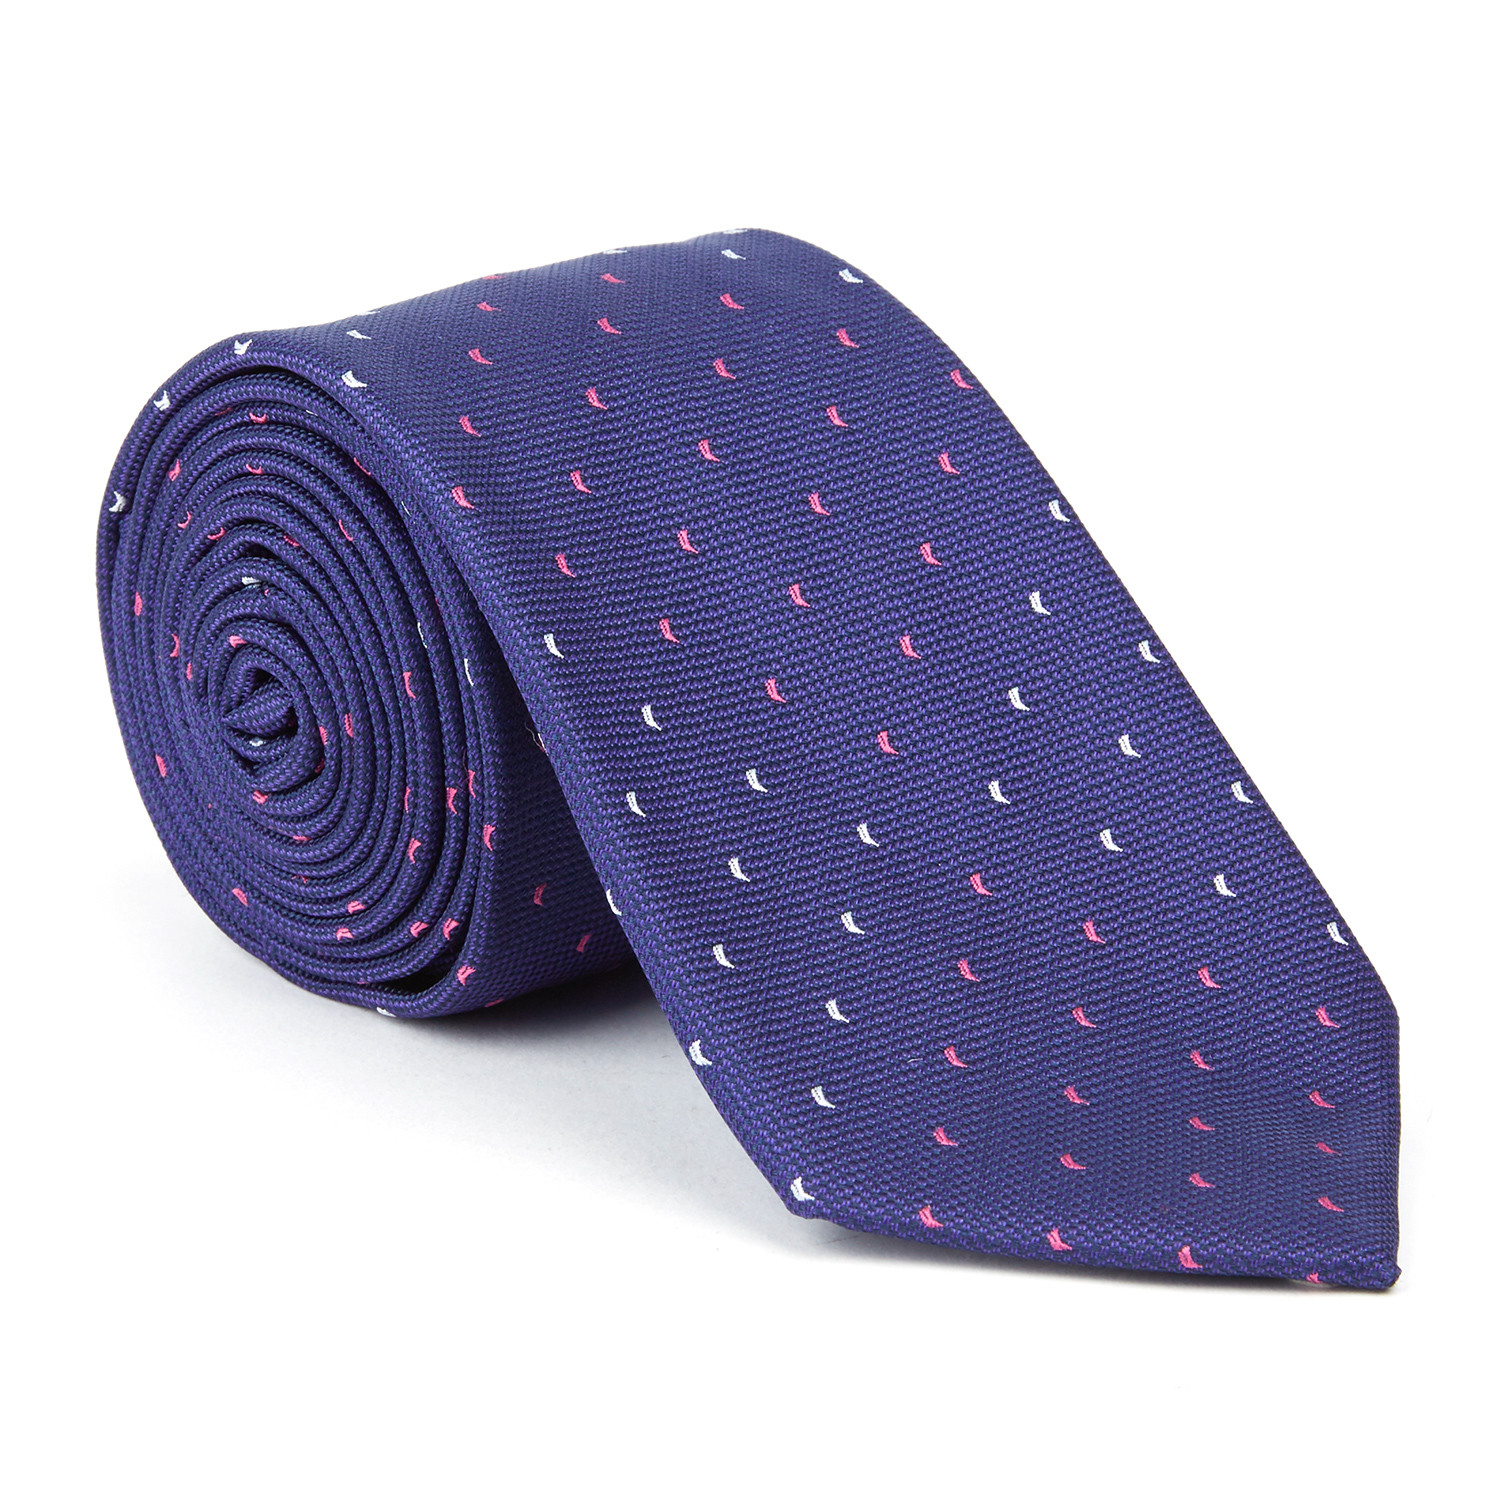 Microfiber Tie // Deep Blue - Classic Ties - Touch of Modern